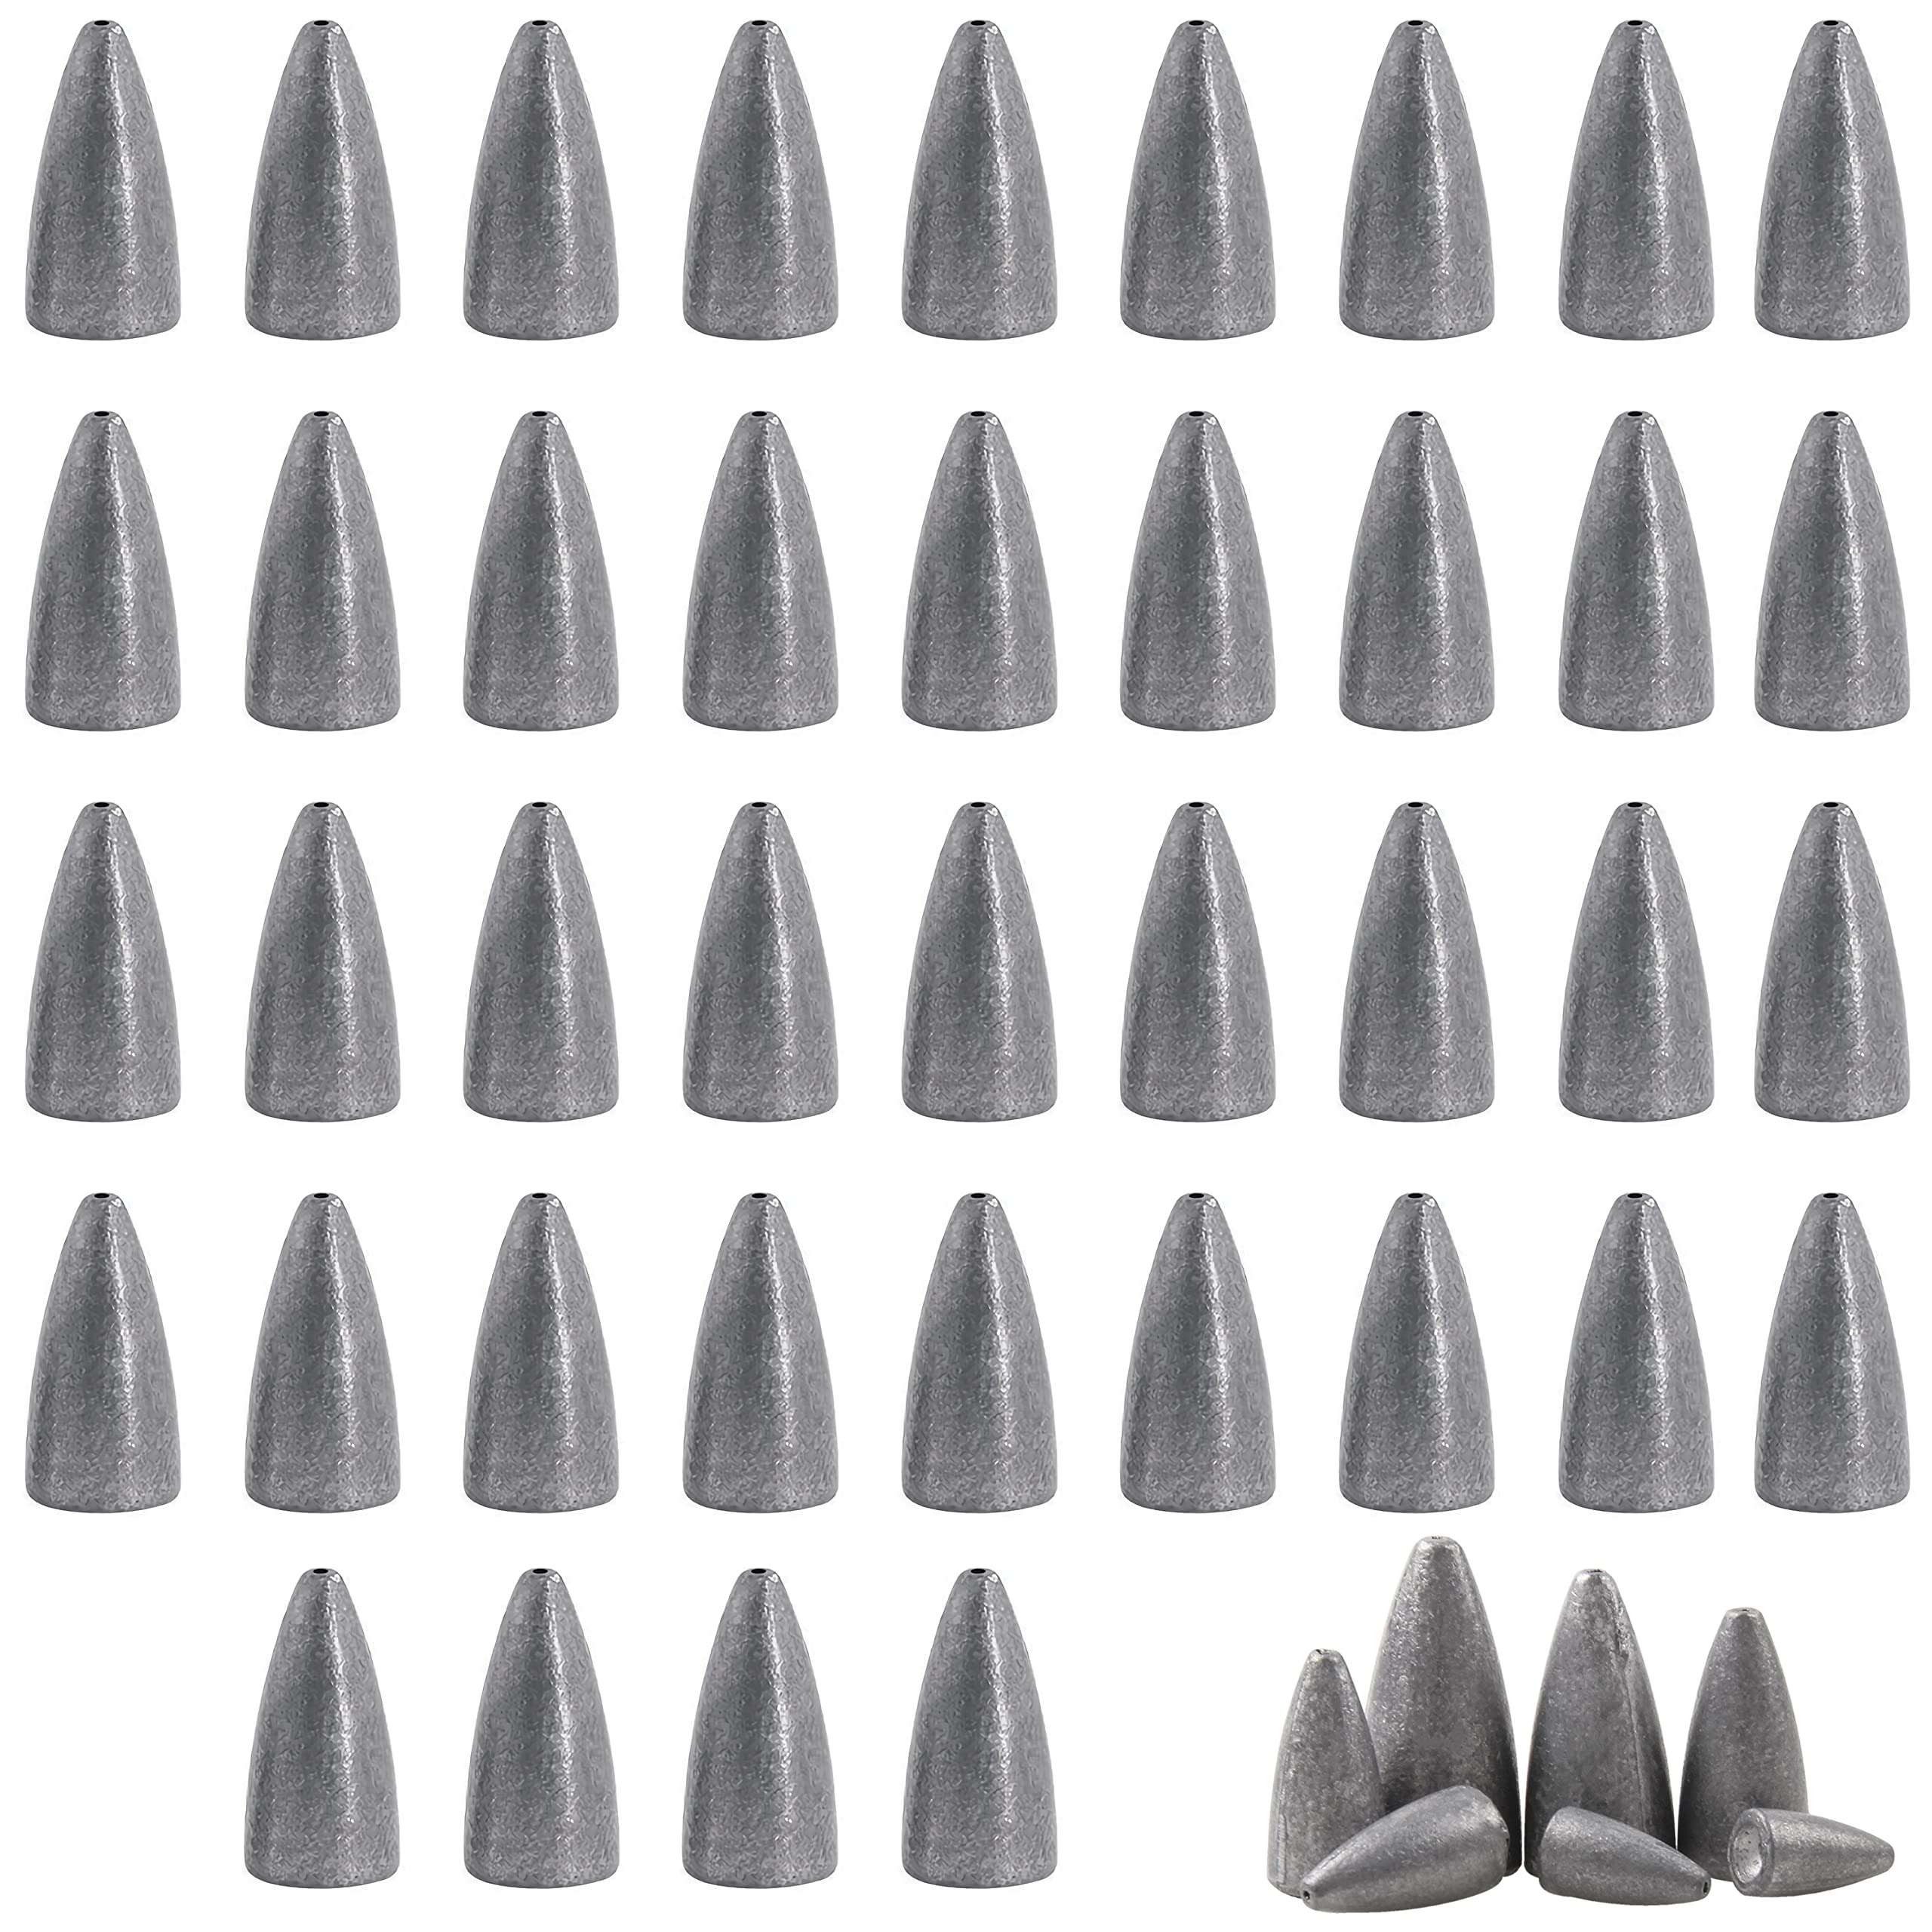 Bullet Fishing Weights Sinkers,40pcs Worm Weights Slip Sinker Assorted Set  for Bass Fishing Texas Rigs